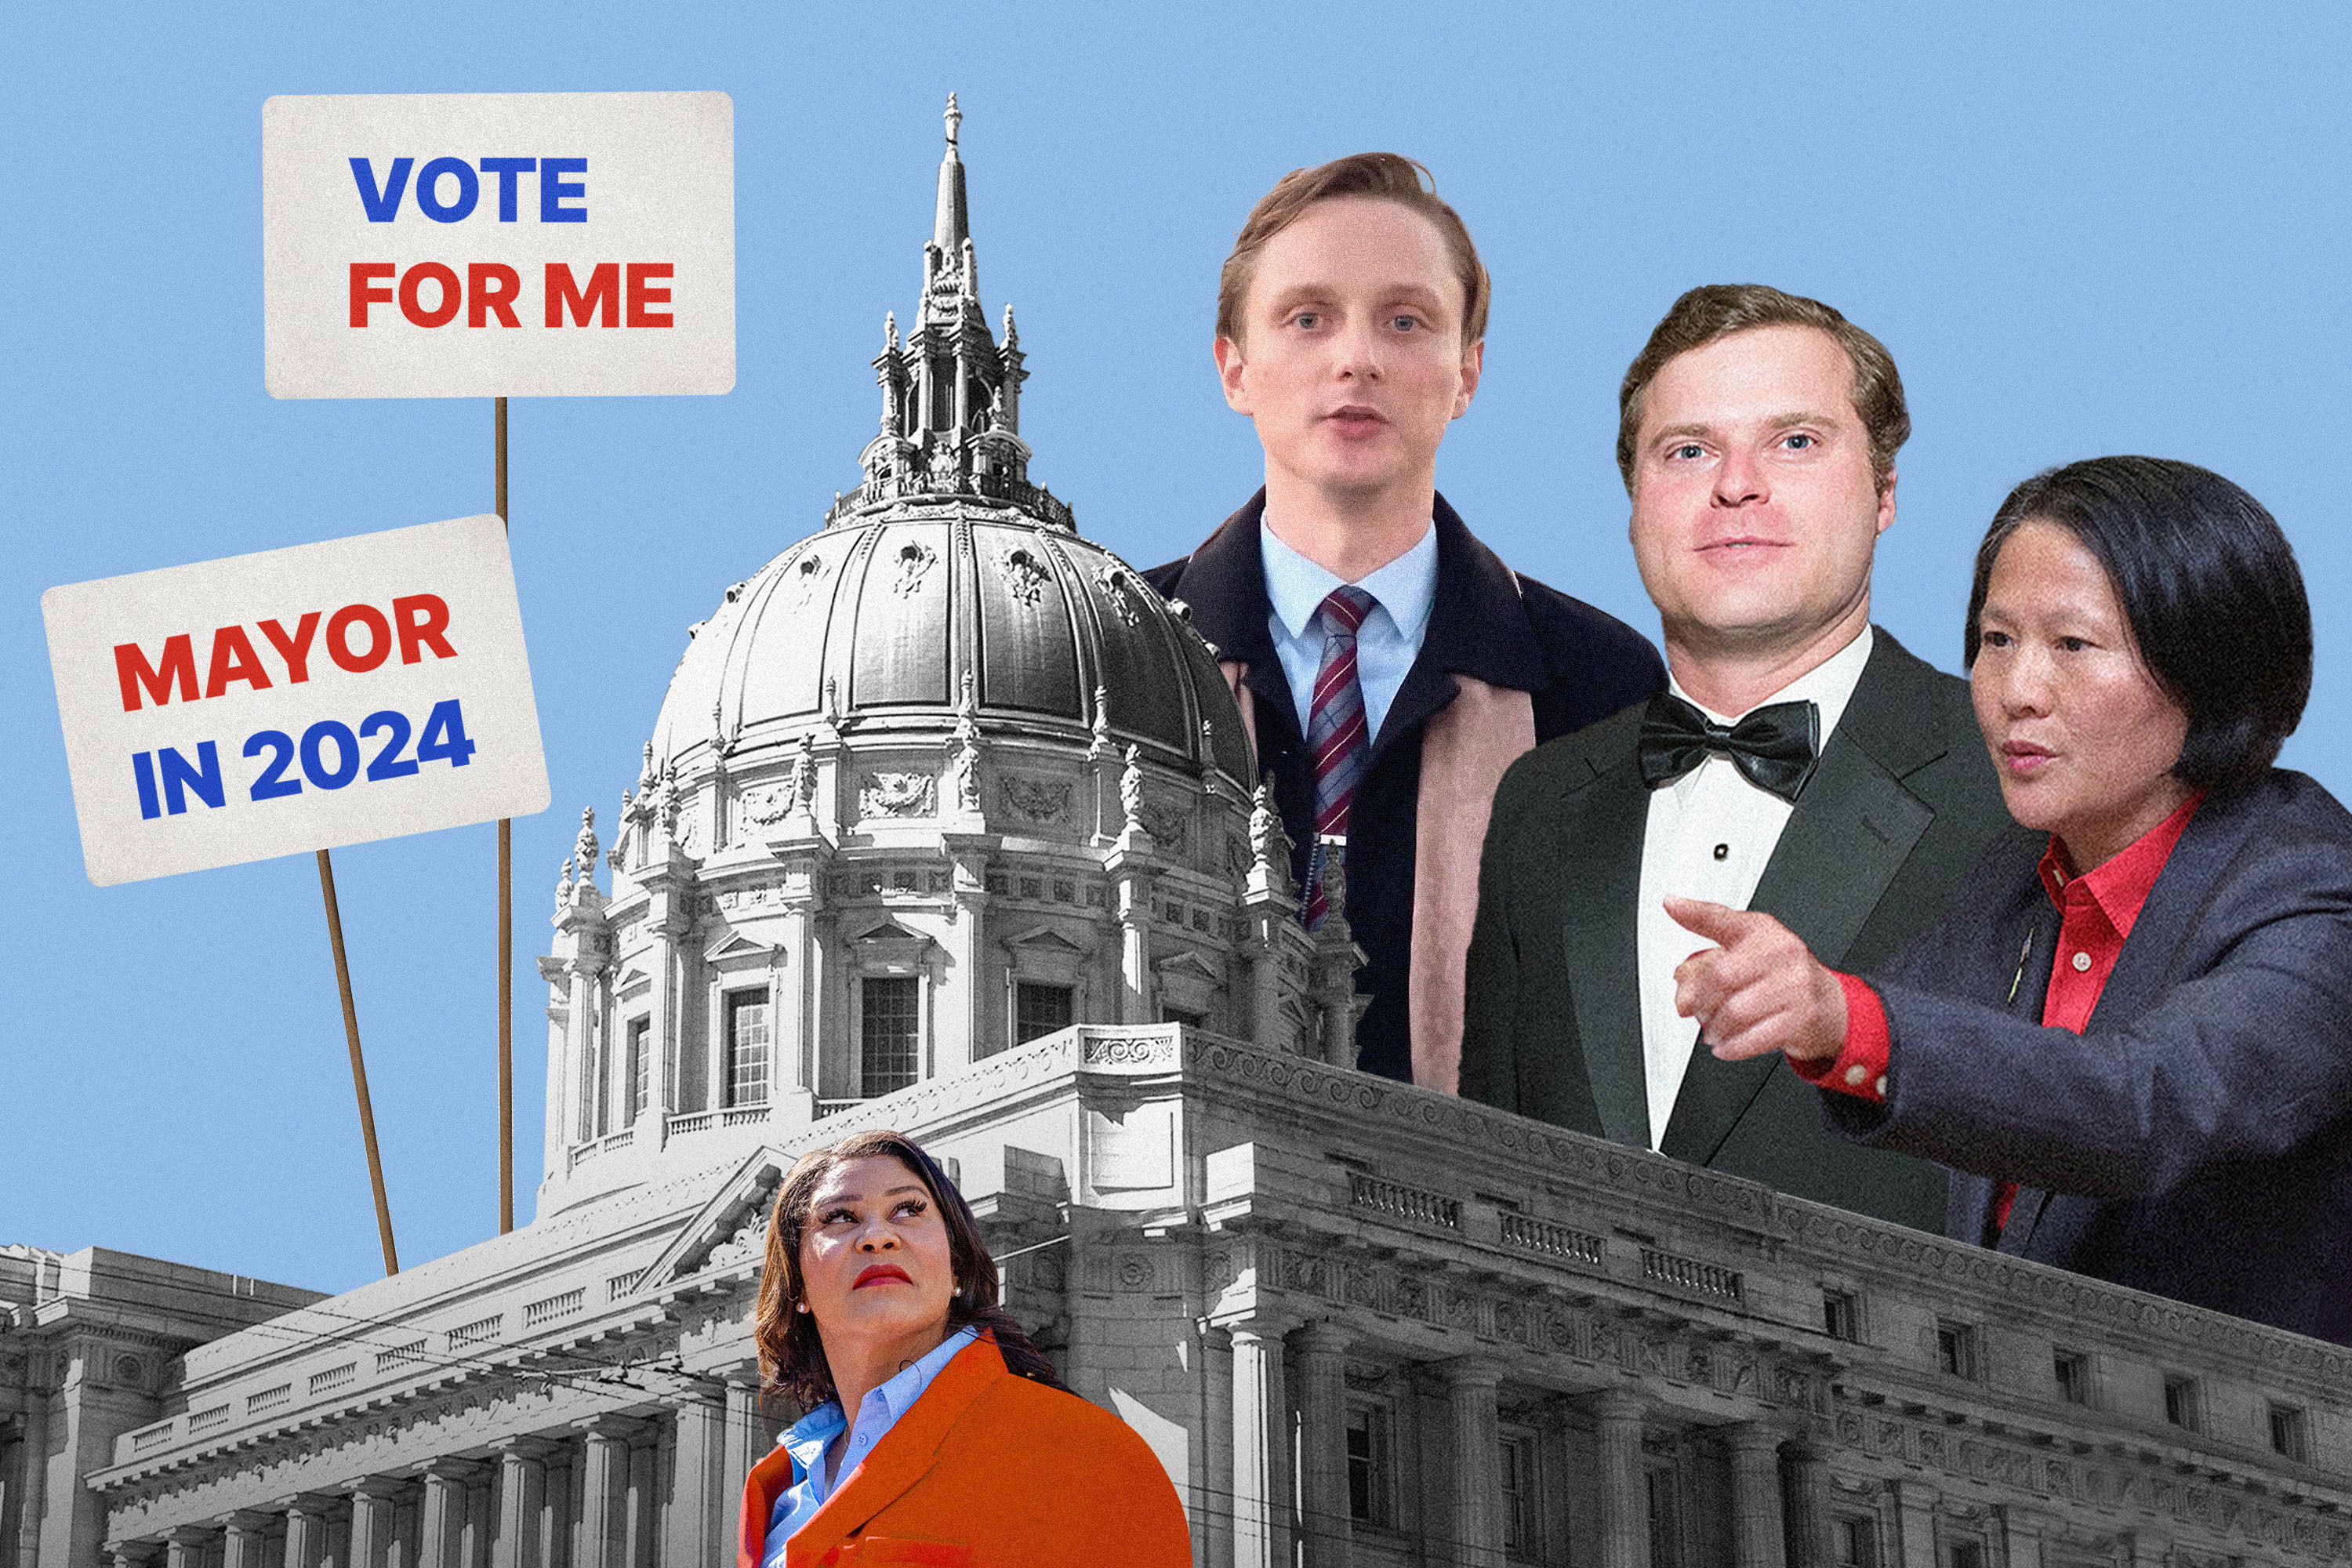 Collage of individuals in business attire with "Vote for Me" and "Mayor in 2024" signs, against a city hall backdrop.